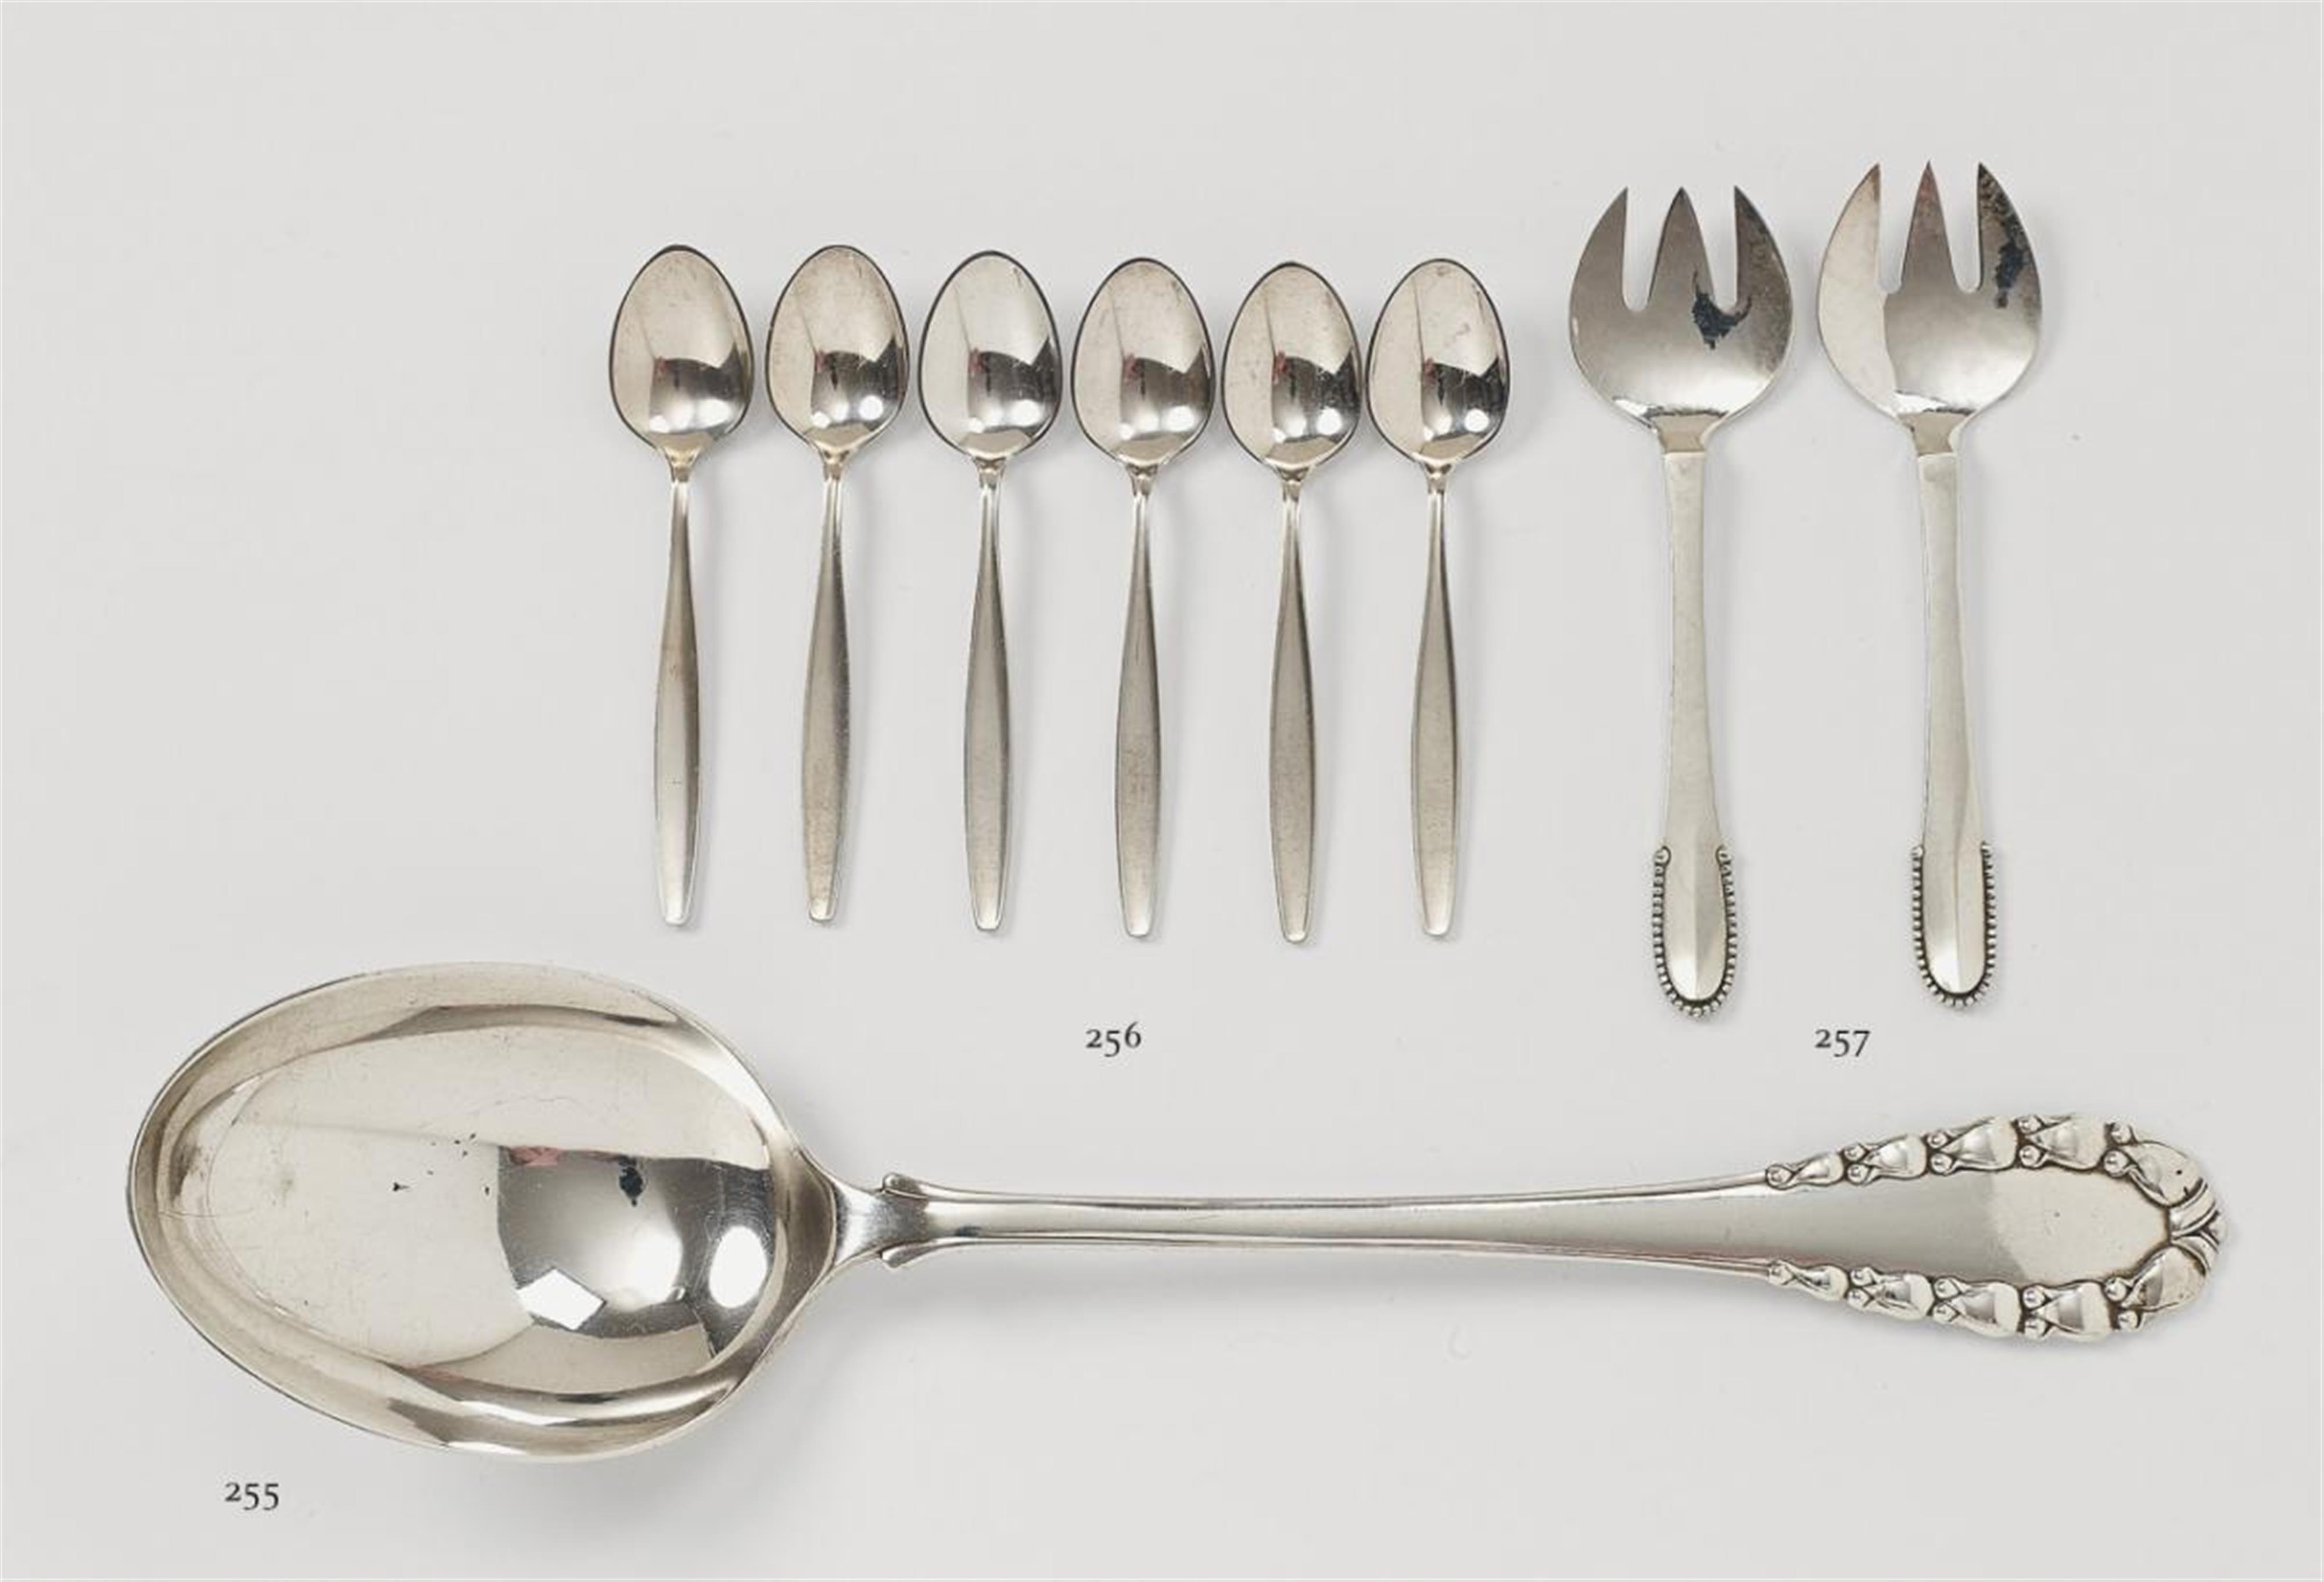 A pair of small silver beaded pattern serving forks no. 7. Marks of Georg Jensen, designed in 1916, made from 1945 - 76. - image-1